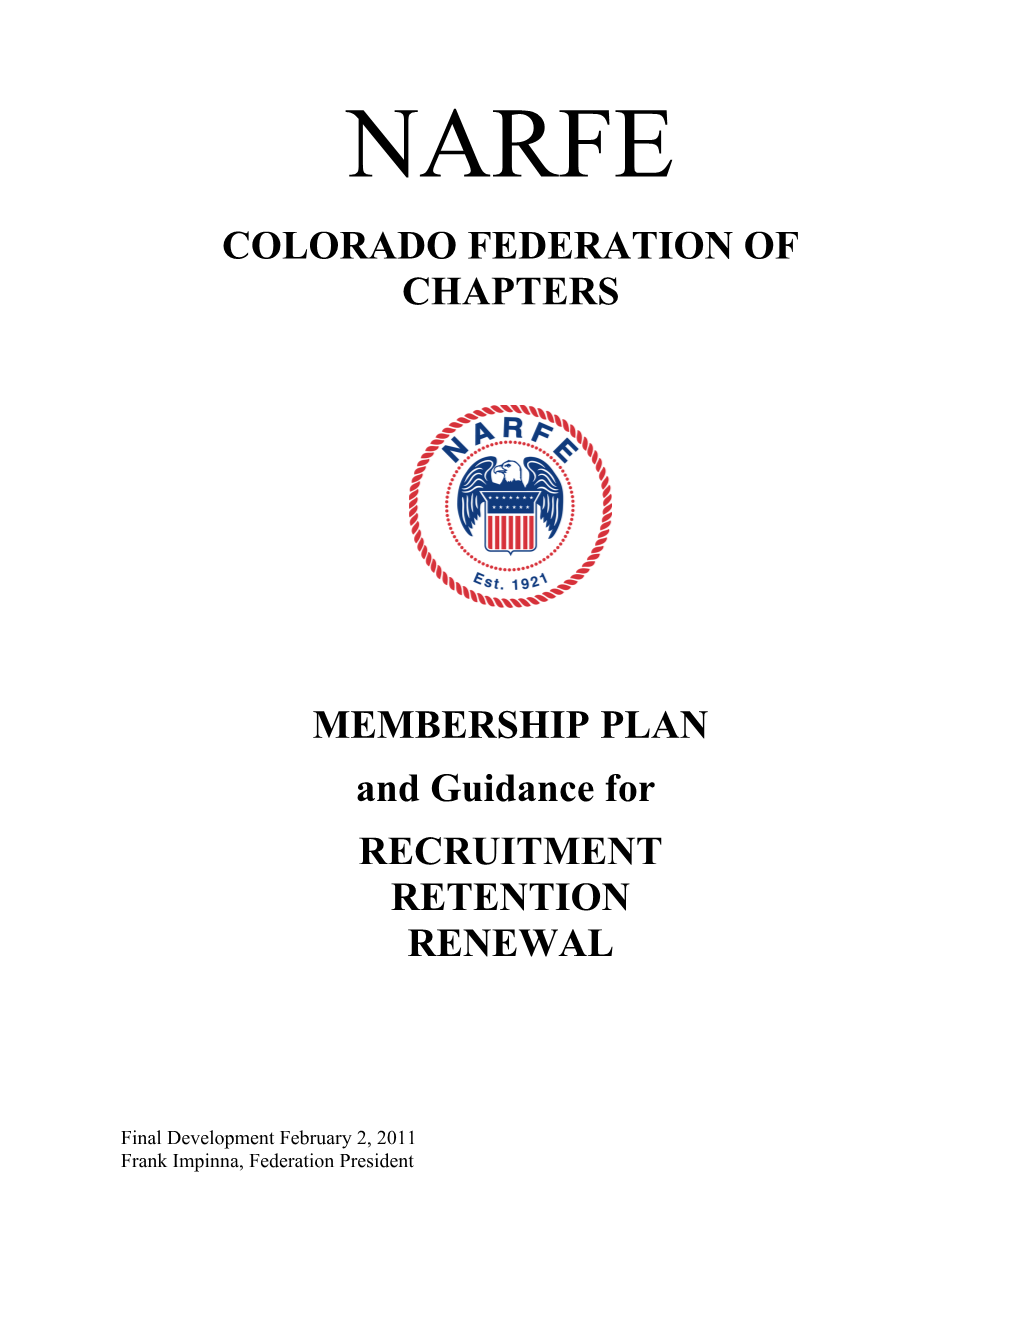 Colorado Federation of Chapters